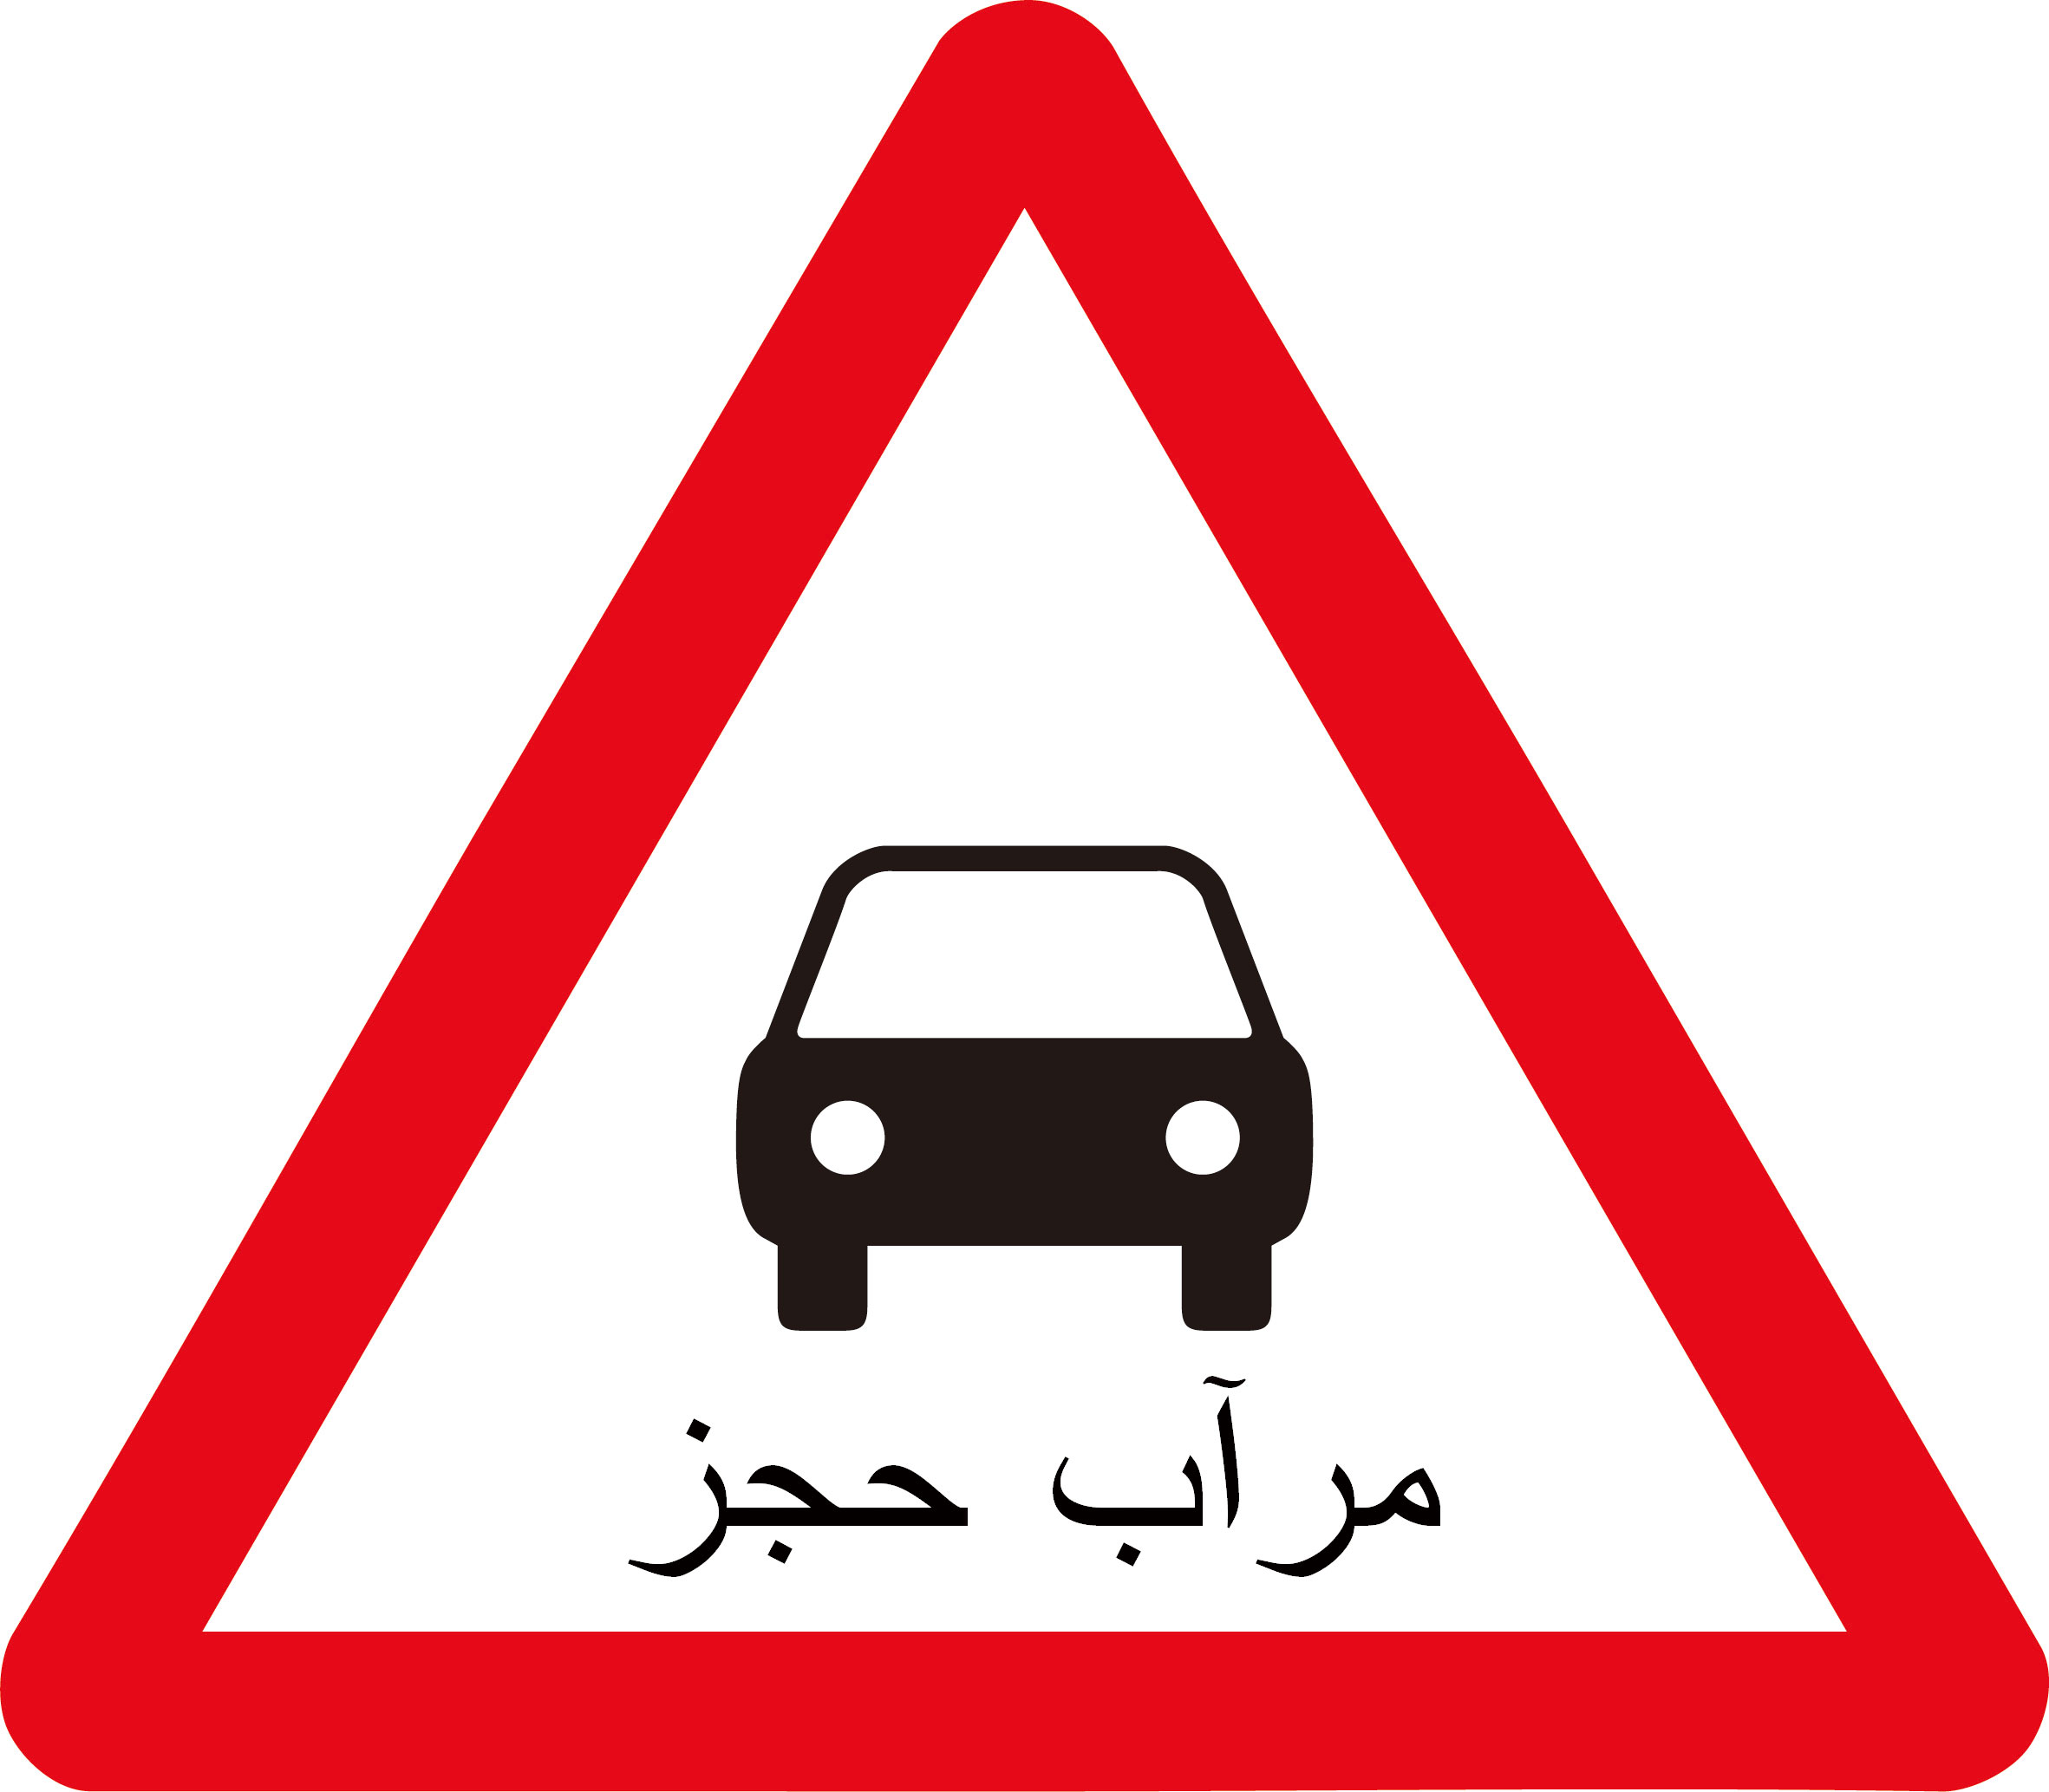 Red triangle road traffic signs and symbols of ...